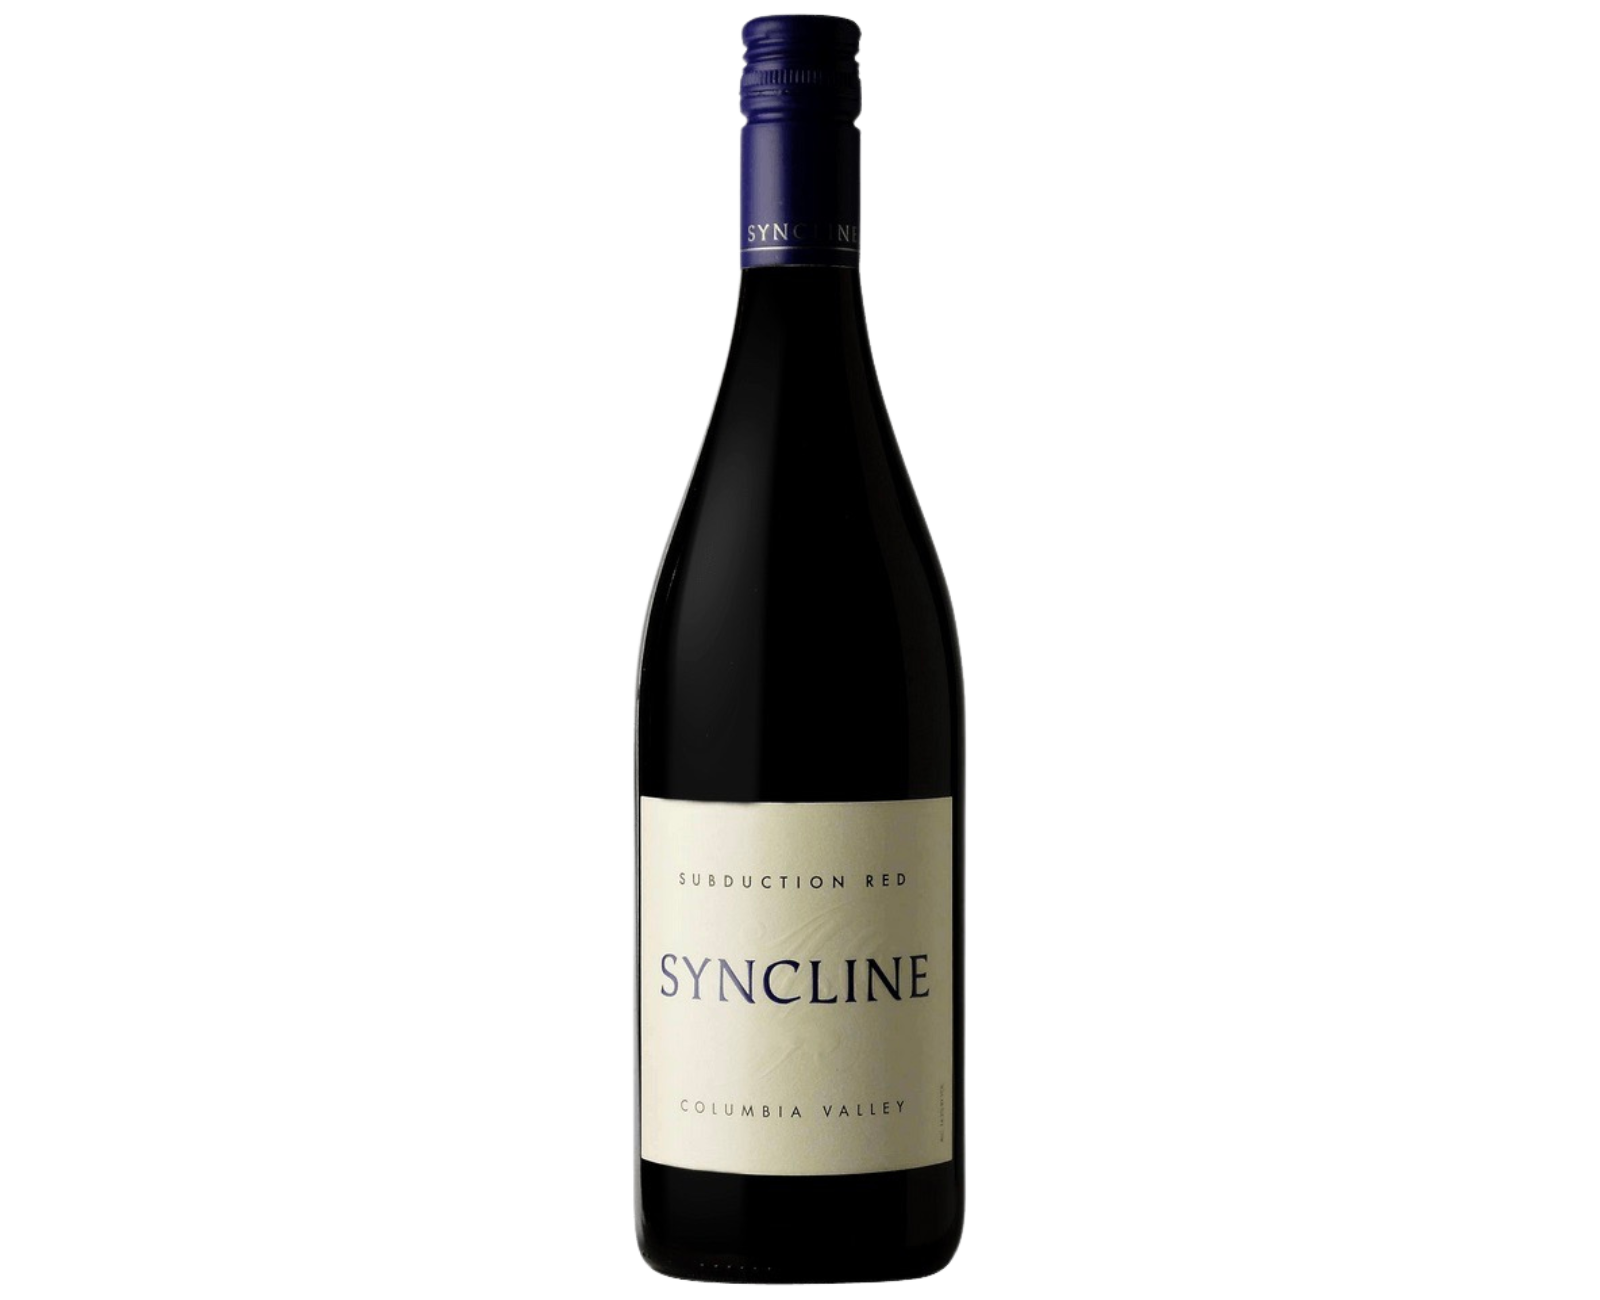 Syncline 2017 'Subduction Red,' Columbia Valley